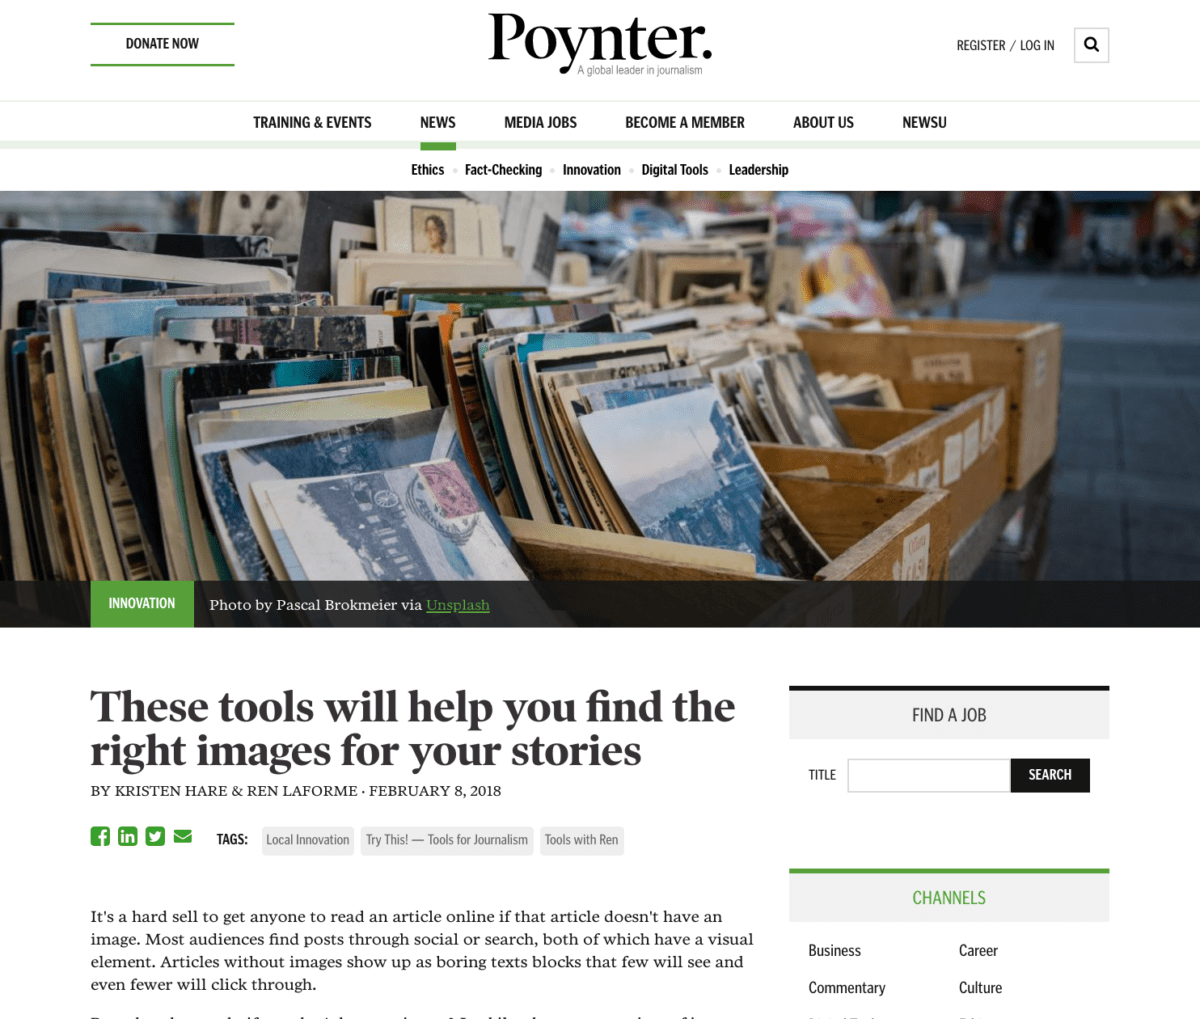 A Poytner piece on using free photography unsurprisingly uses free photography